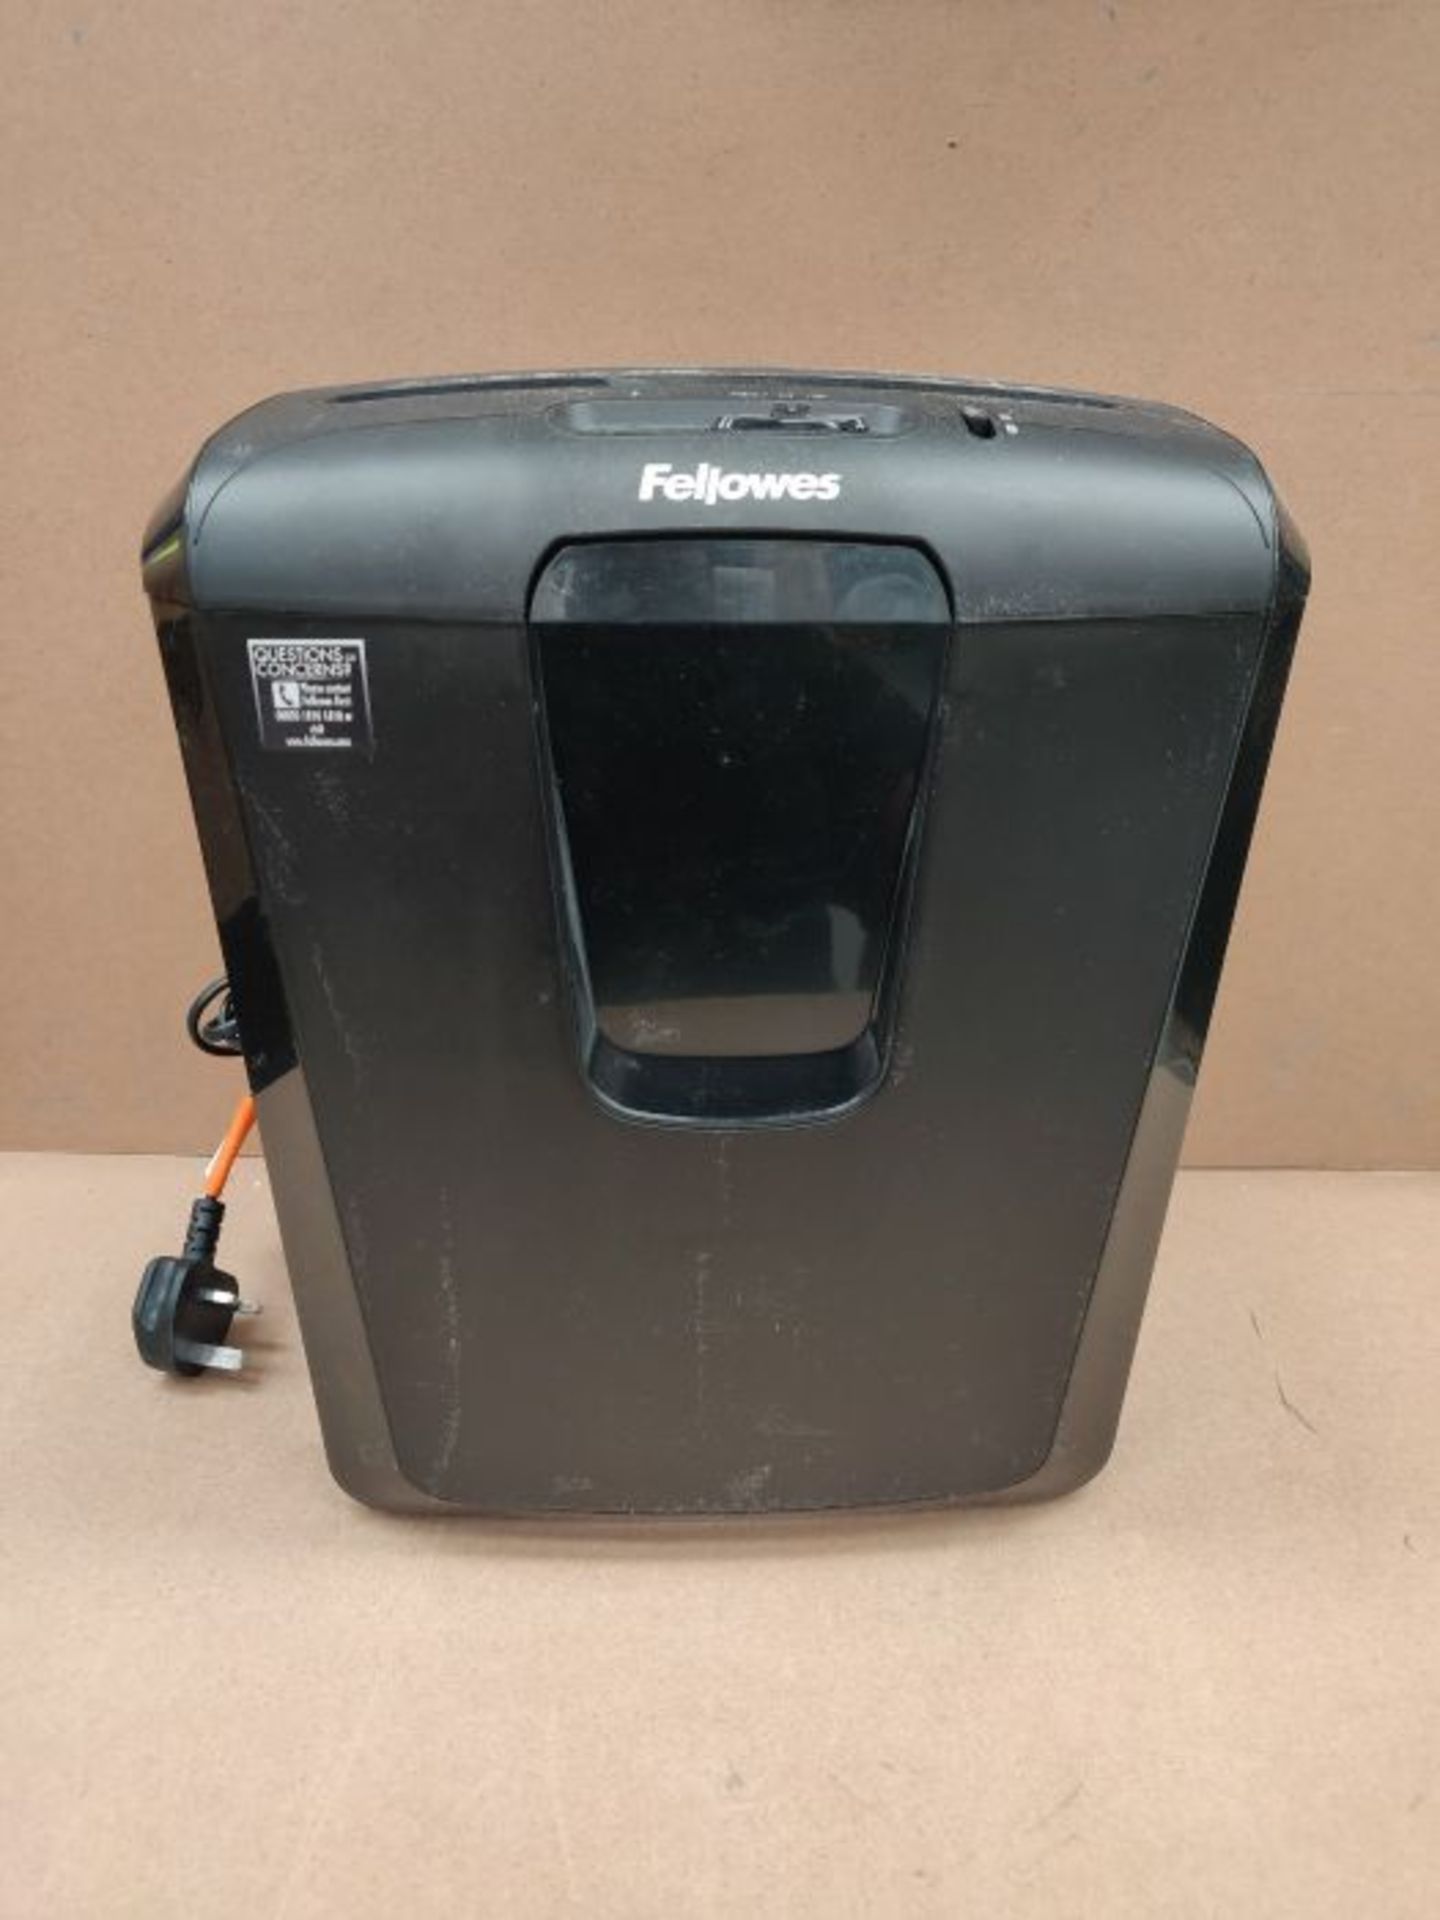 Fellowes Powershred M-8C 8 Sheet Cross Cut Personal Shredder with Safety Lock - Image 2 of 2